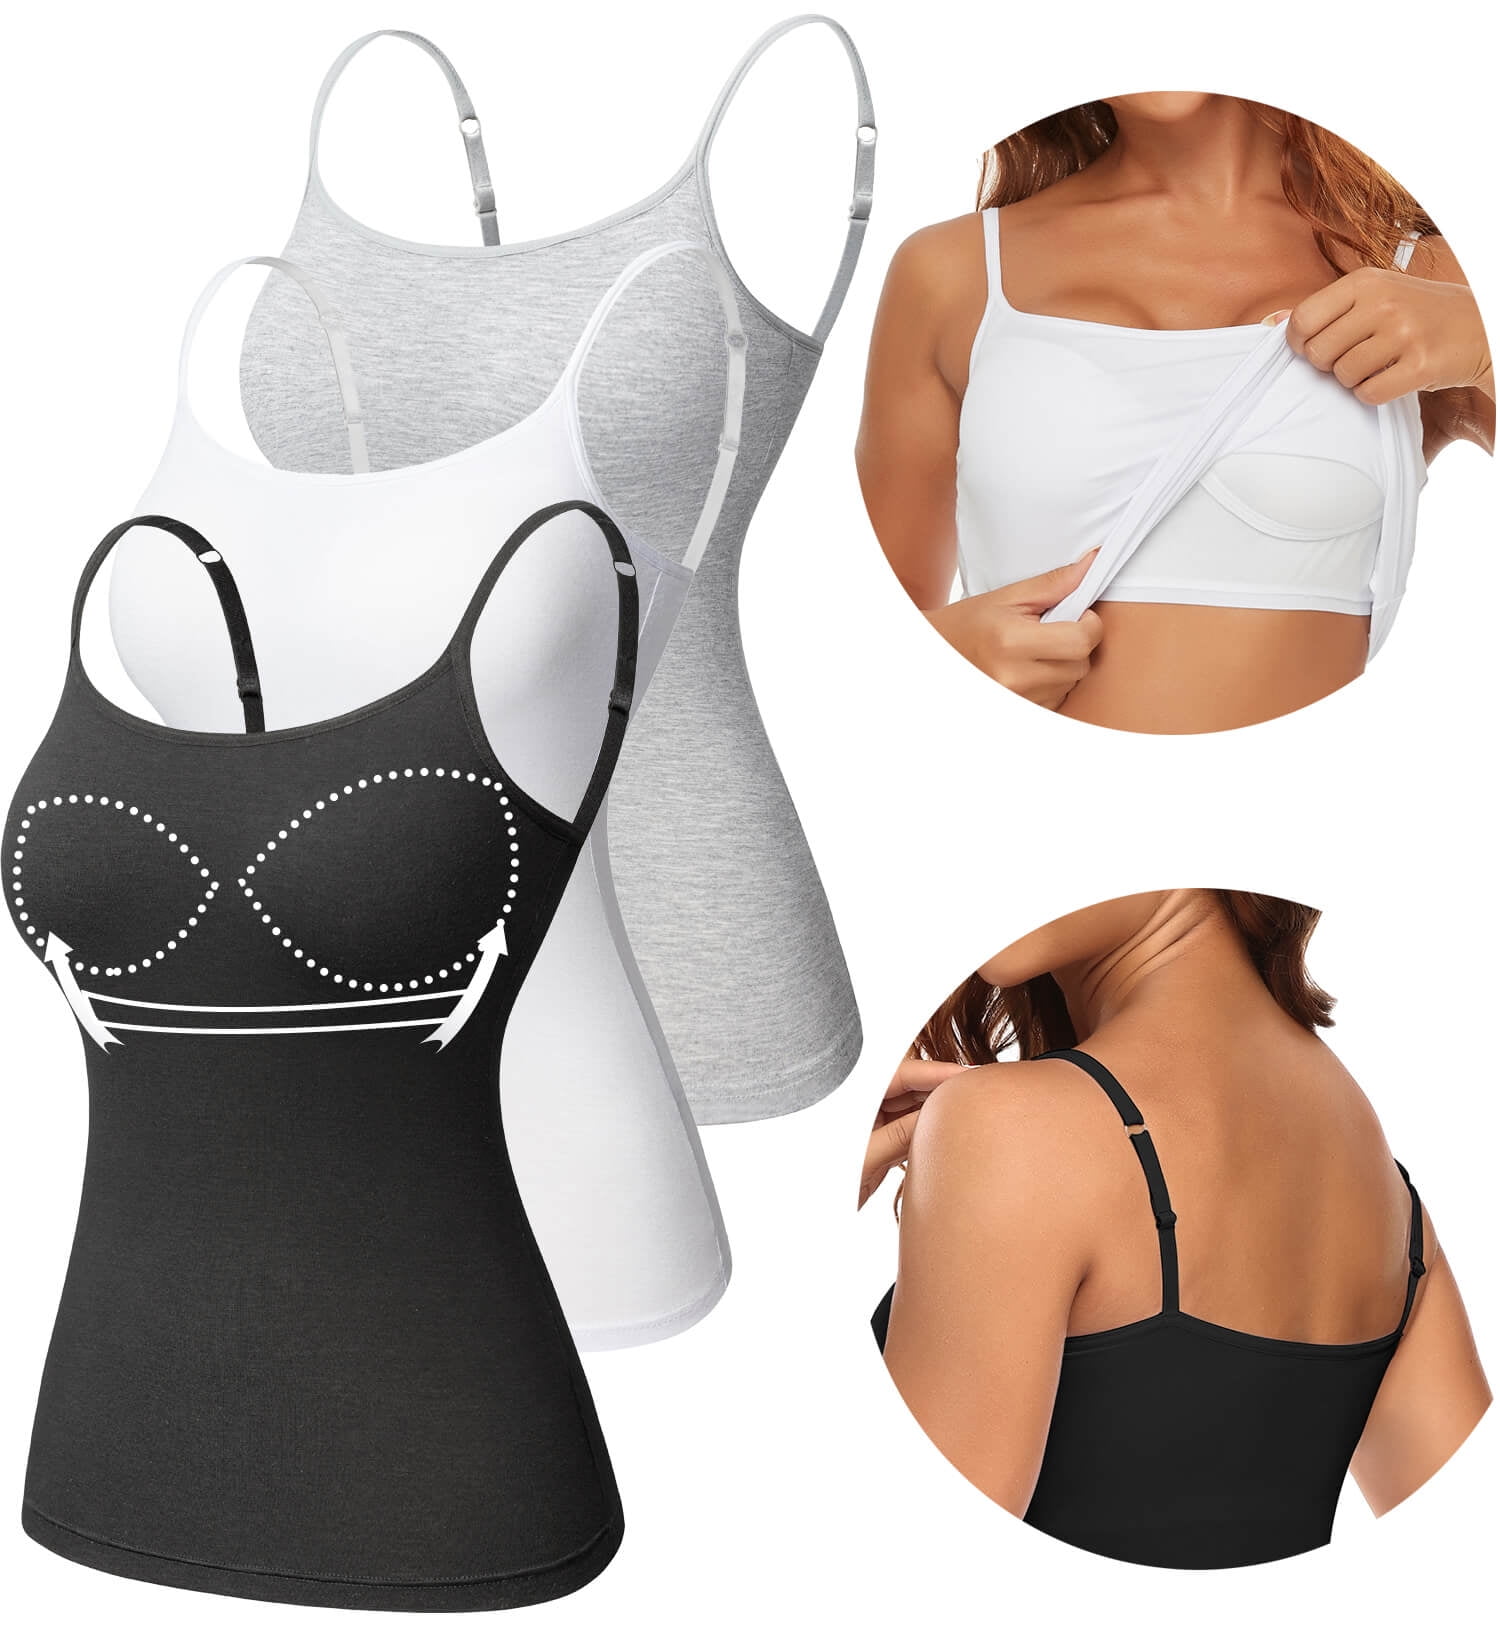 MANIFIQUE 2 Pack Women's Camisole with Built-in Padded Bra Adjustbale  Spaghetti Strap Tank Top Cami Comfort Undershirt 